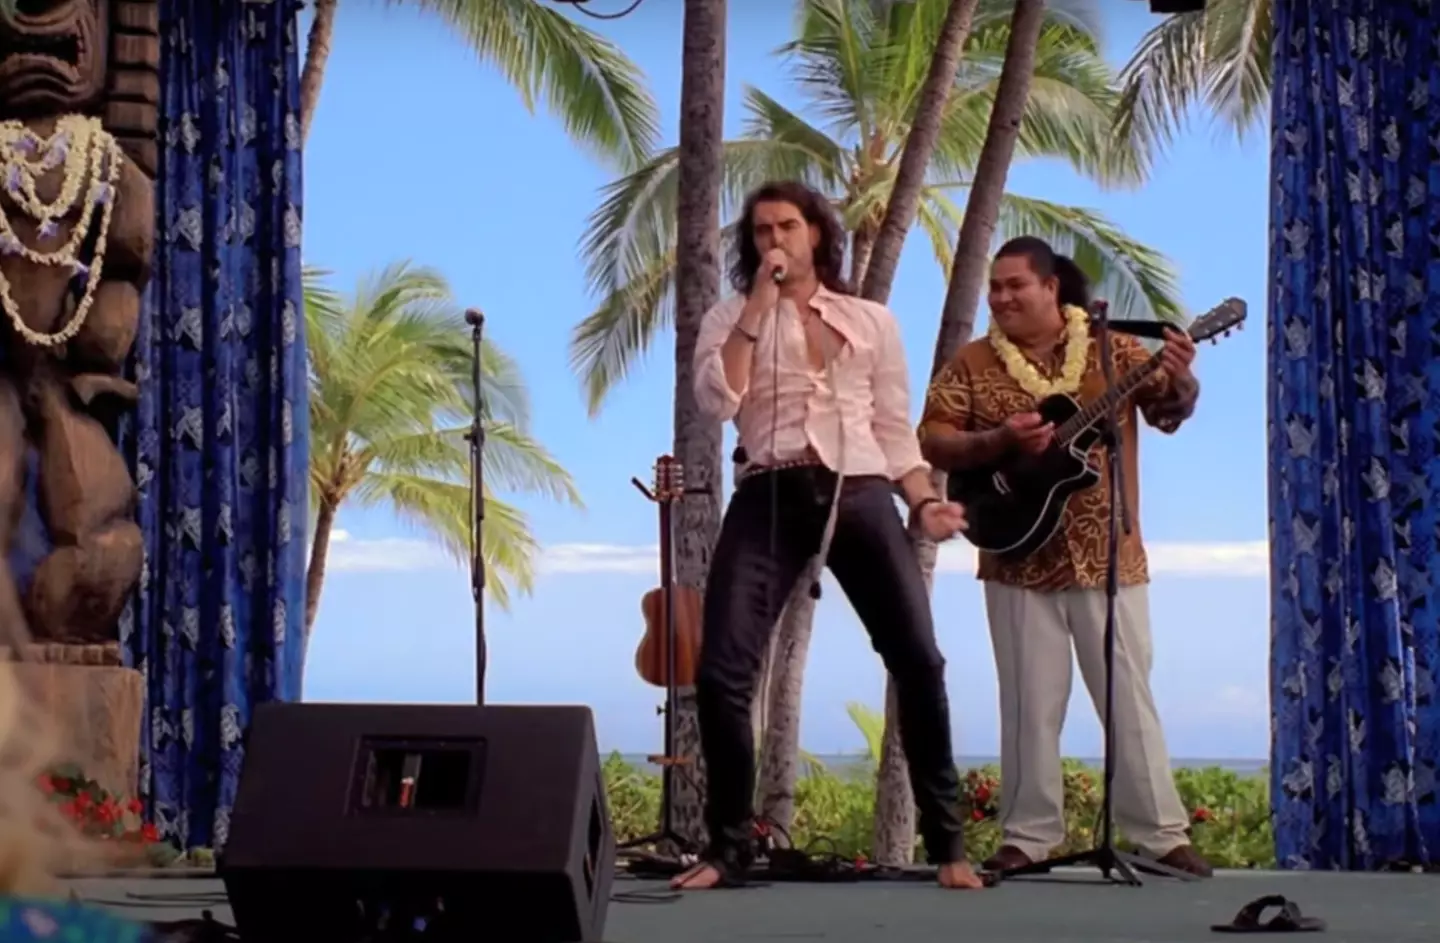 Russell Brand as Aldous Snow in Forgetting Sarah Marshall.